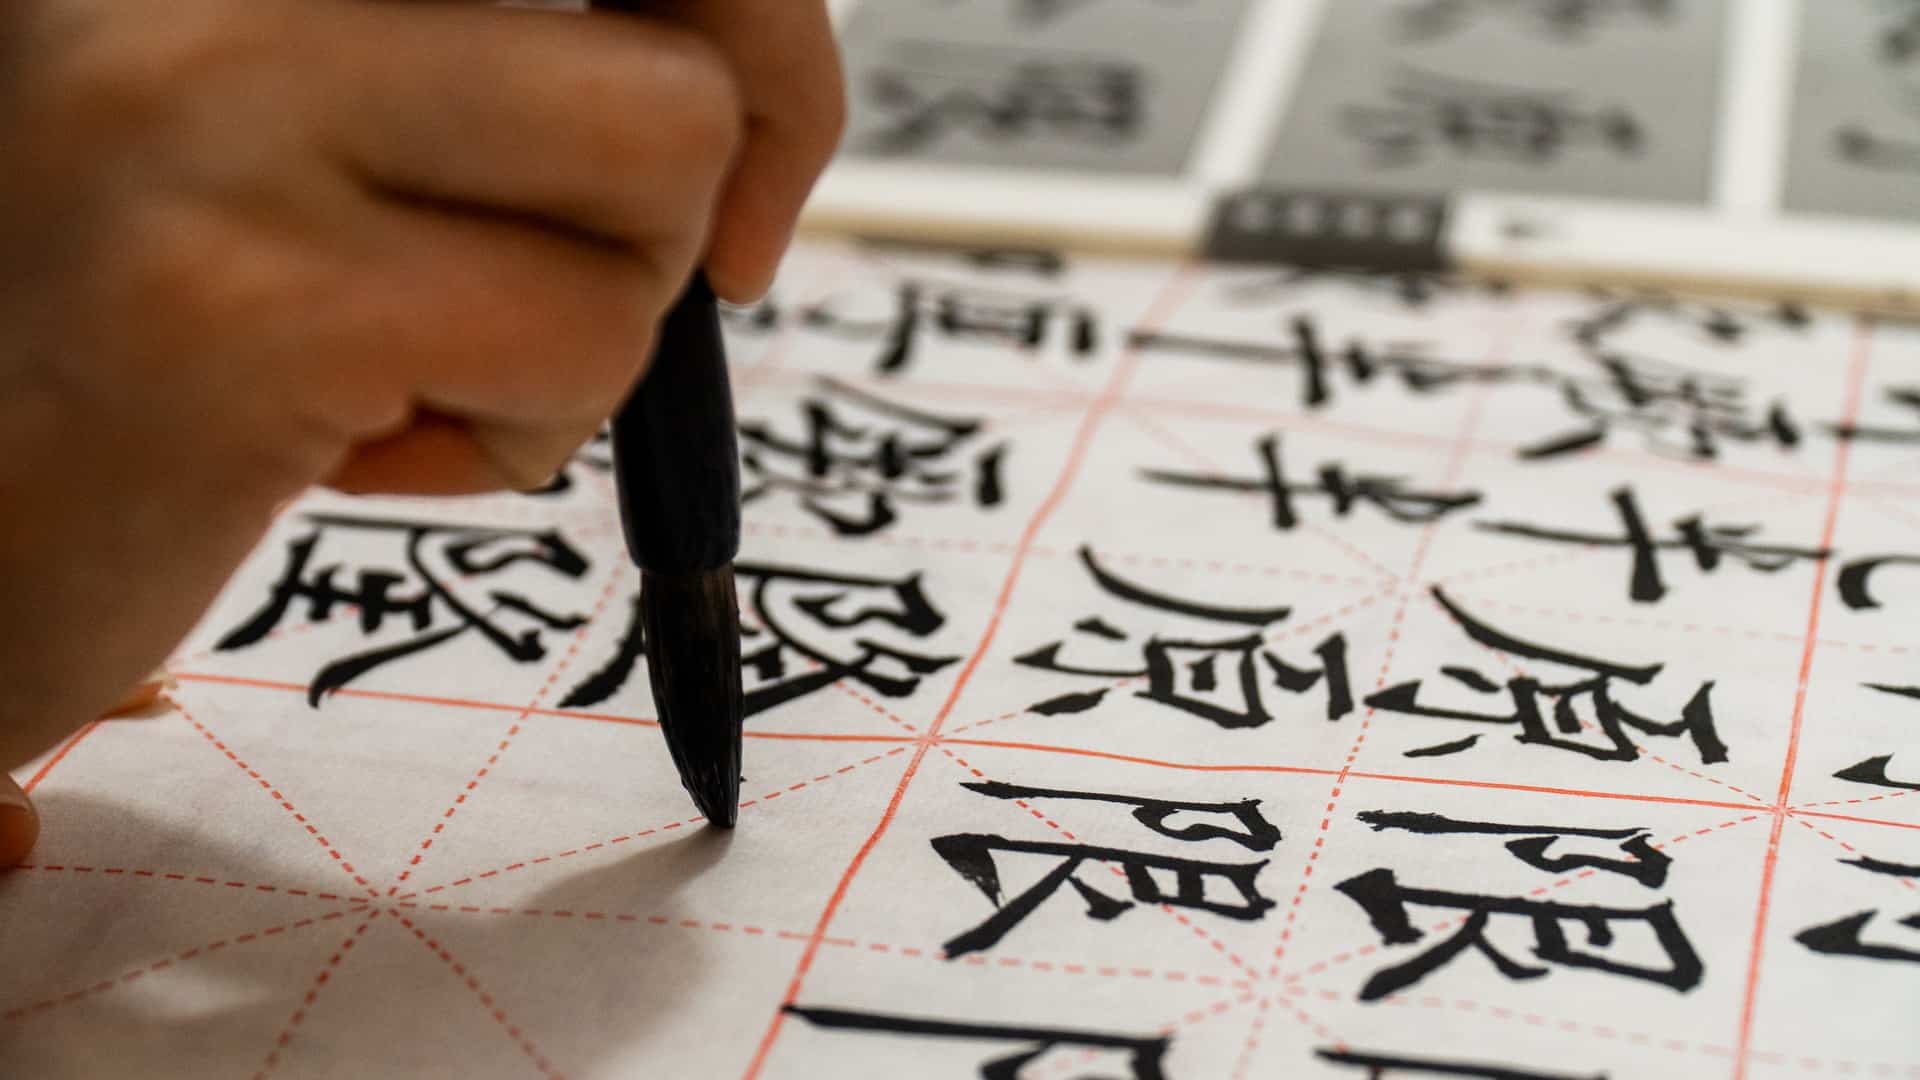 Chinese lettering